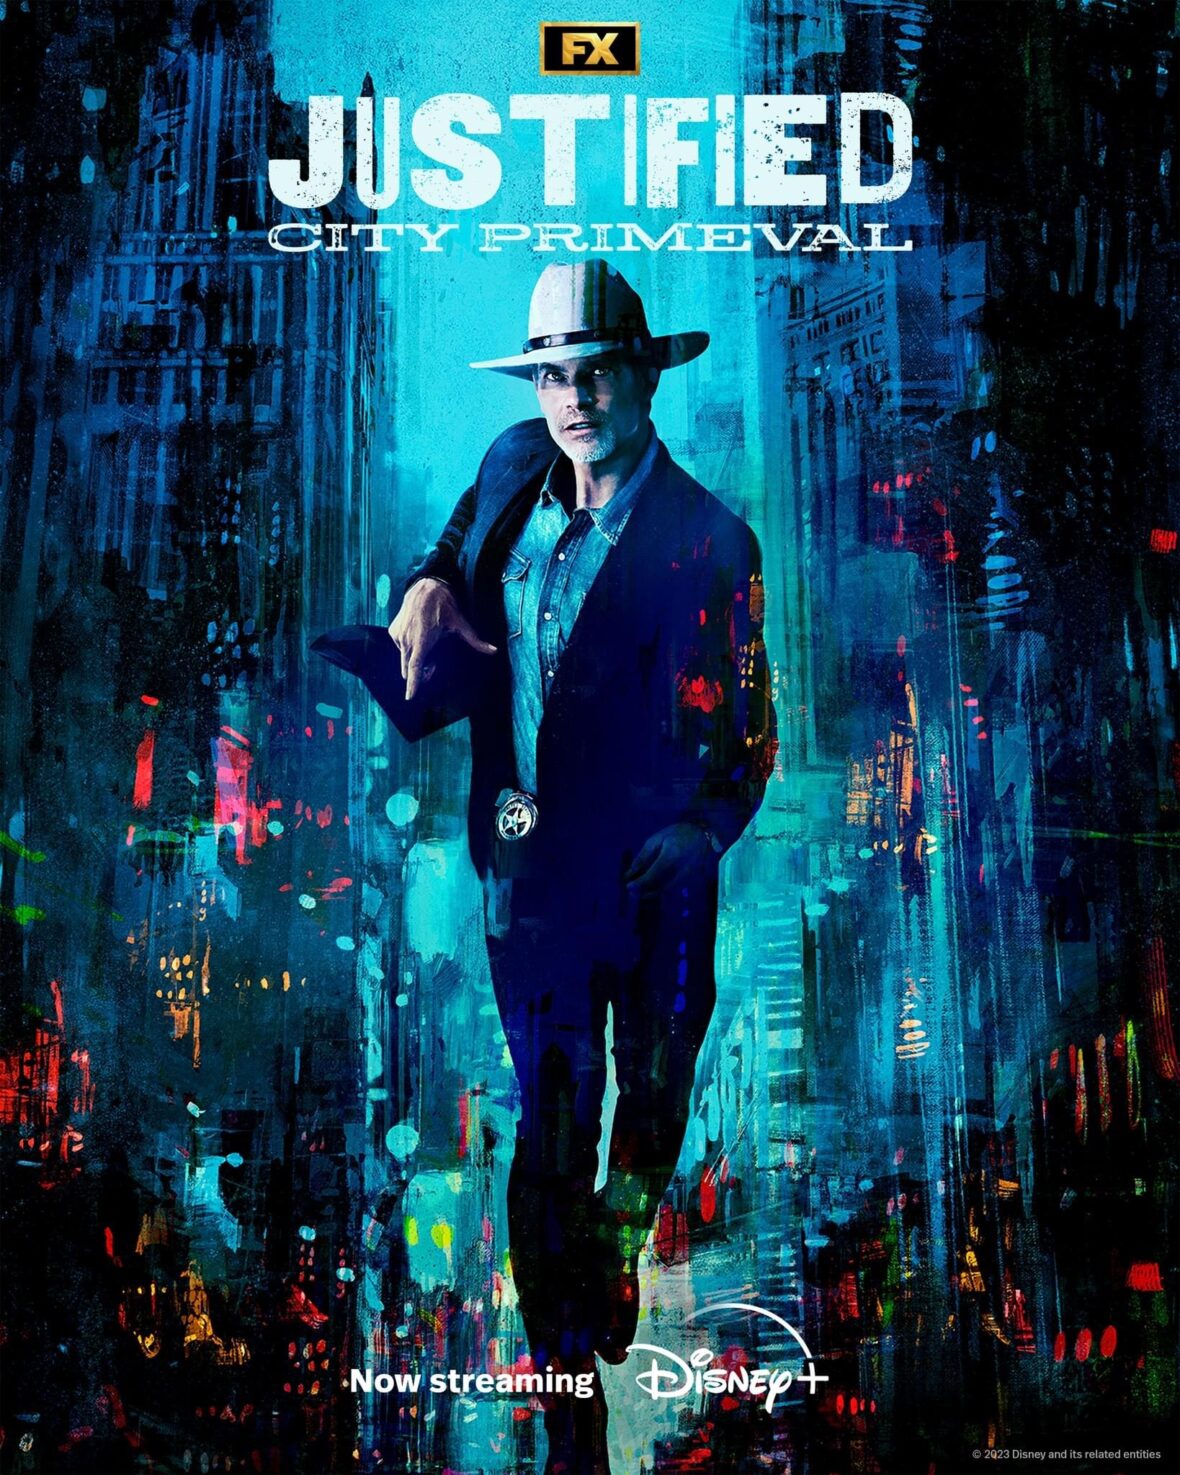 Justified: City Primeval Review